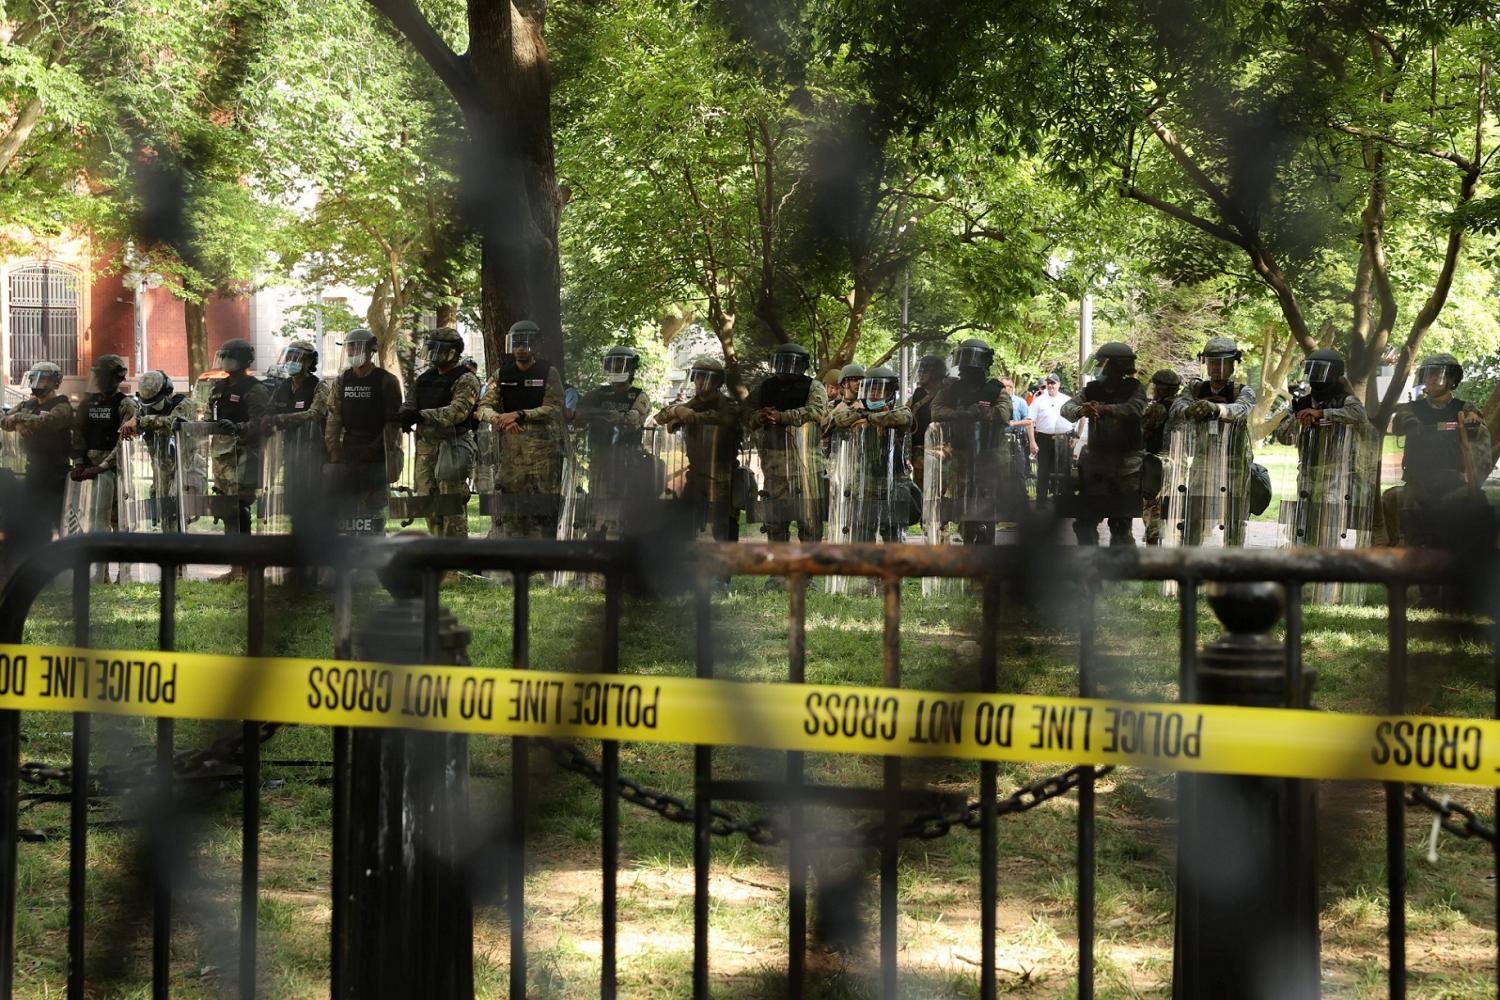 DC National Guard Military Police officers stand guard behind a fence surrounding Lafayette Park outside the White House as protests continue over the death in police custody of George Floyd, in Washington, U.S., June 2, 2020. REUTERS/Jonathan Ernst